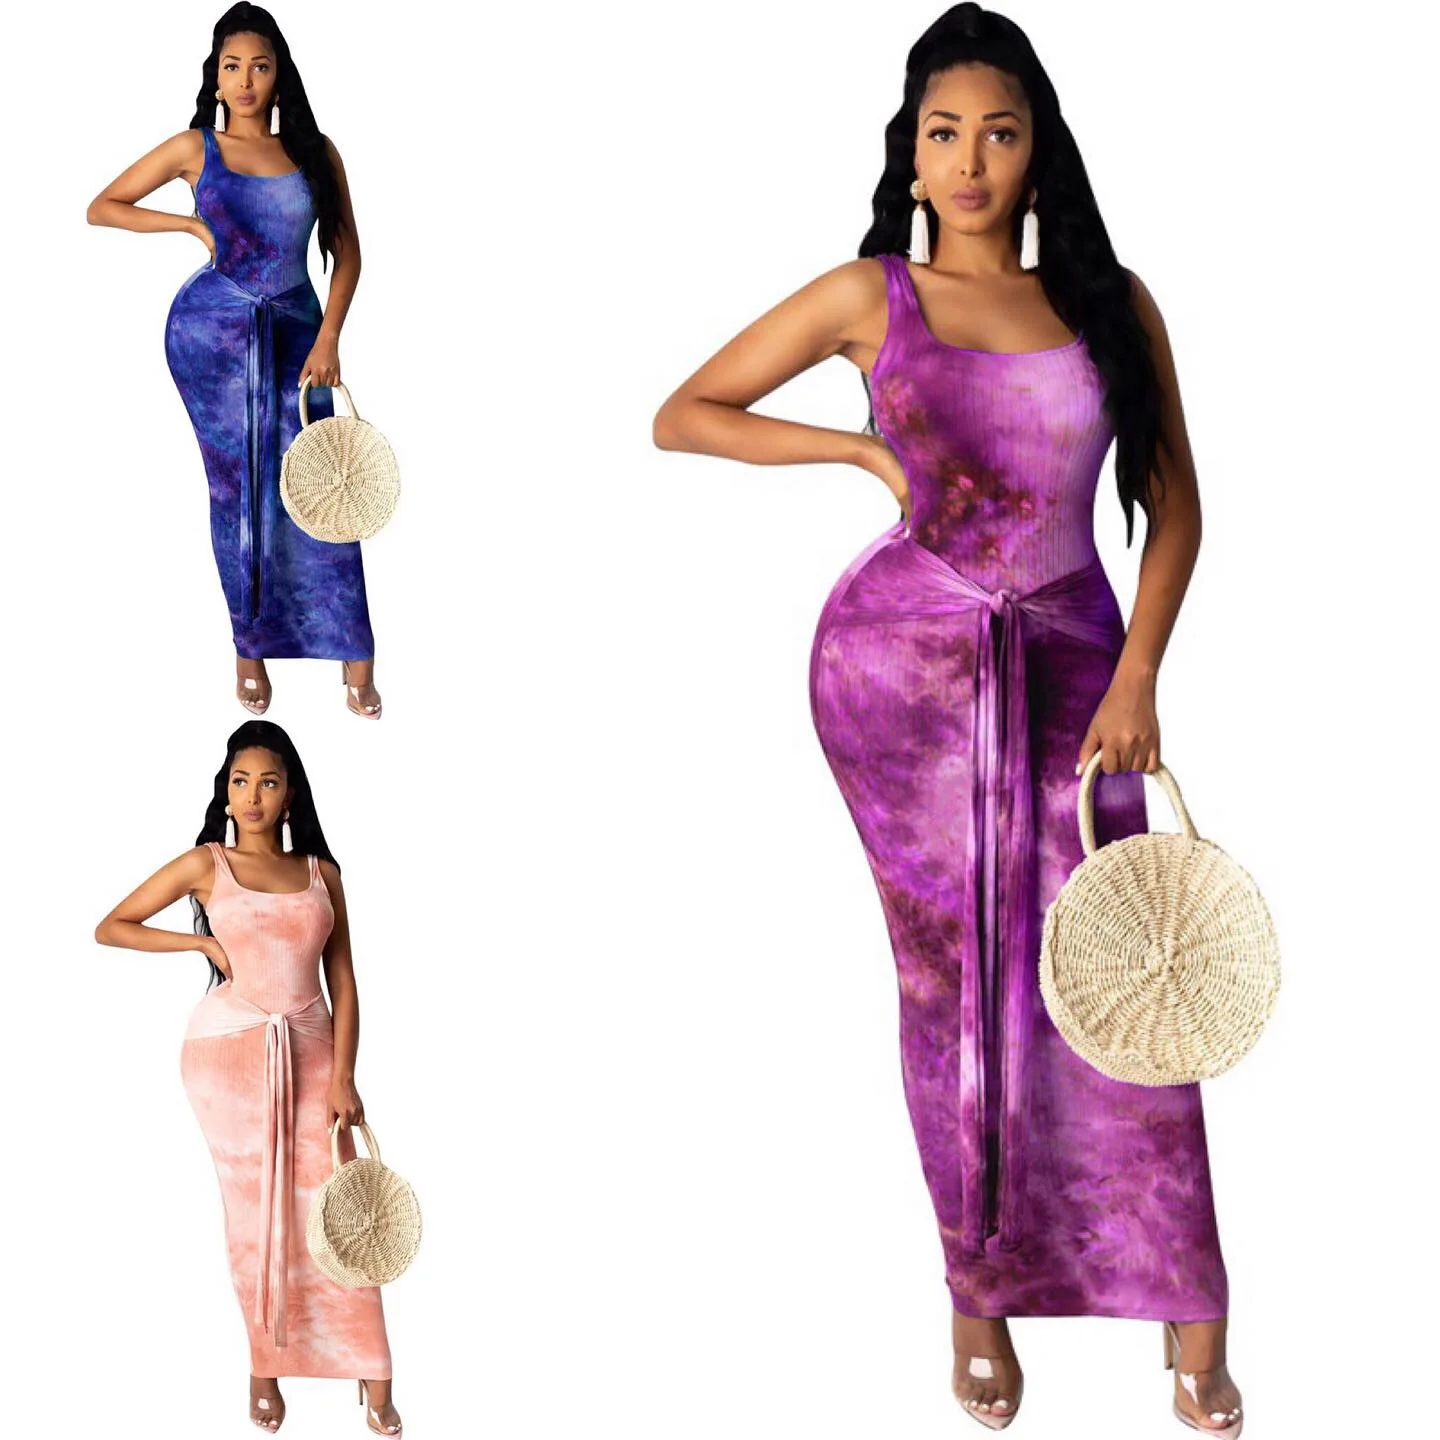 

Billions 2020 Club Wear Tie Dye Ladies Printed Stretch Sexy Bodycon Plus Sizes Party Casual Dresses For Women, Picture color